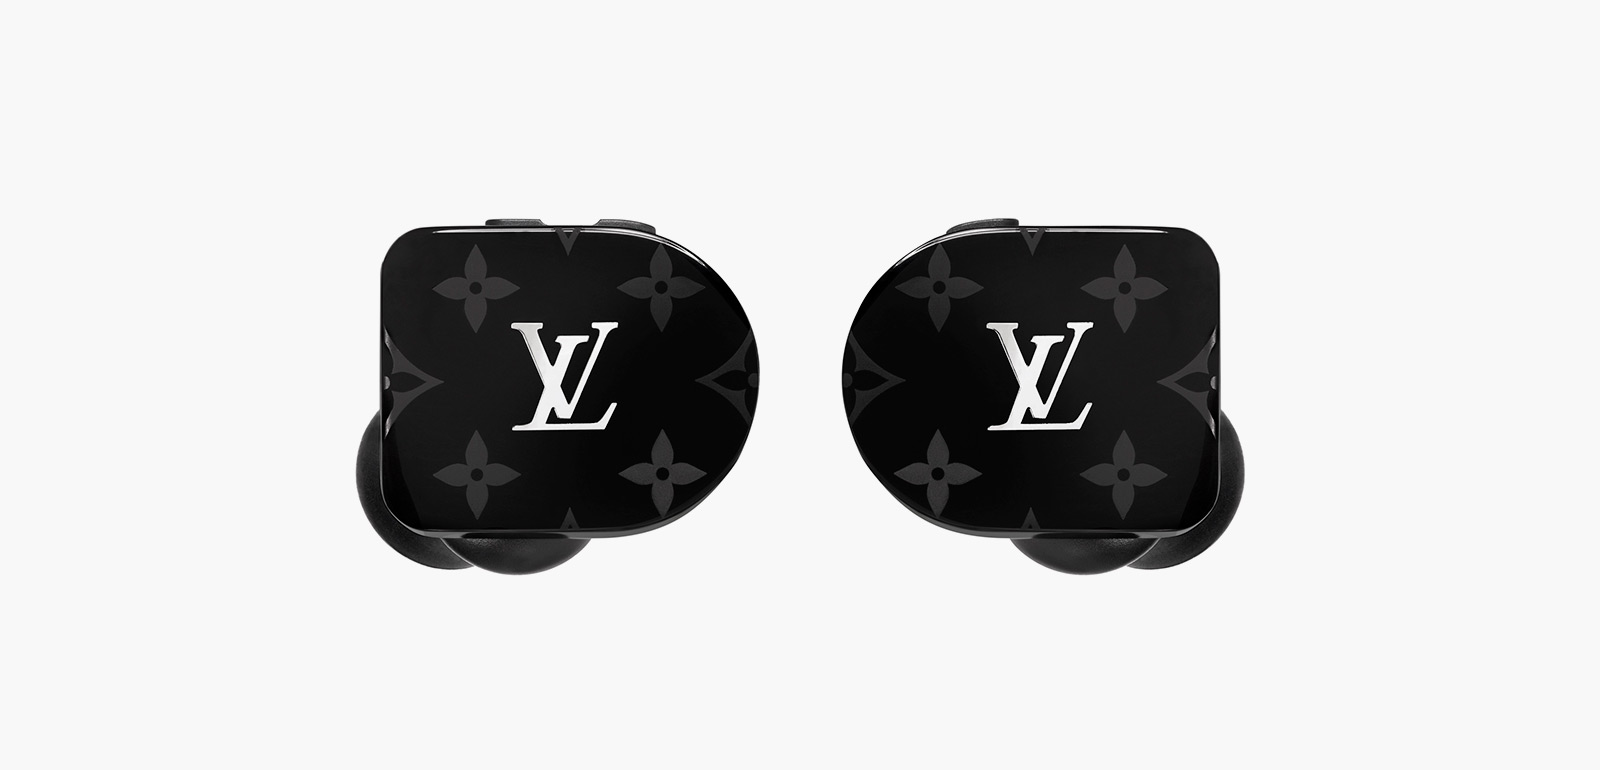 A Louis Vuitton logo on these earbuds will cost you 700  The Verge